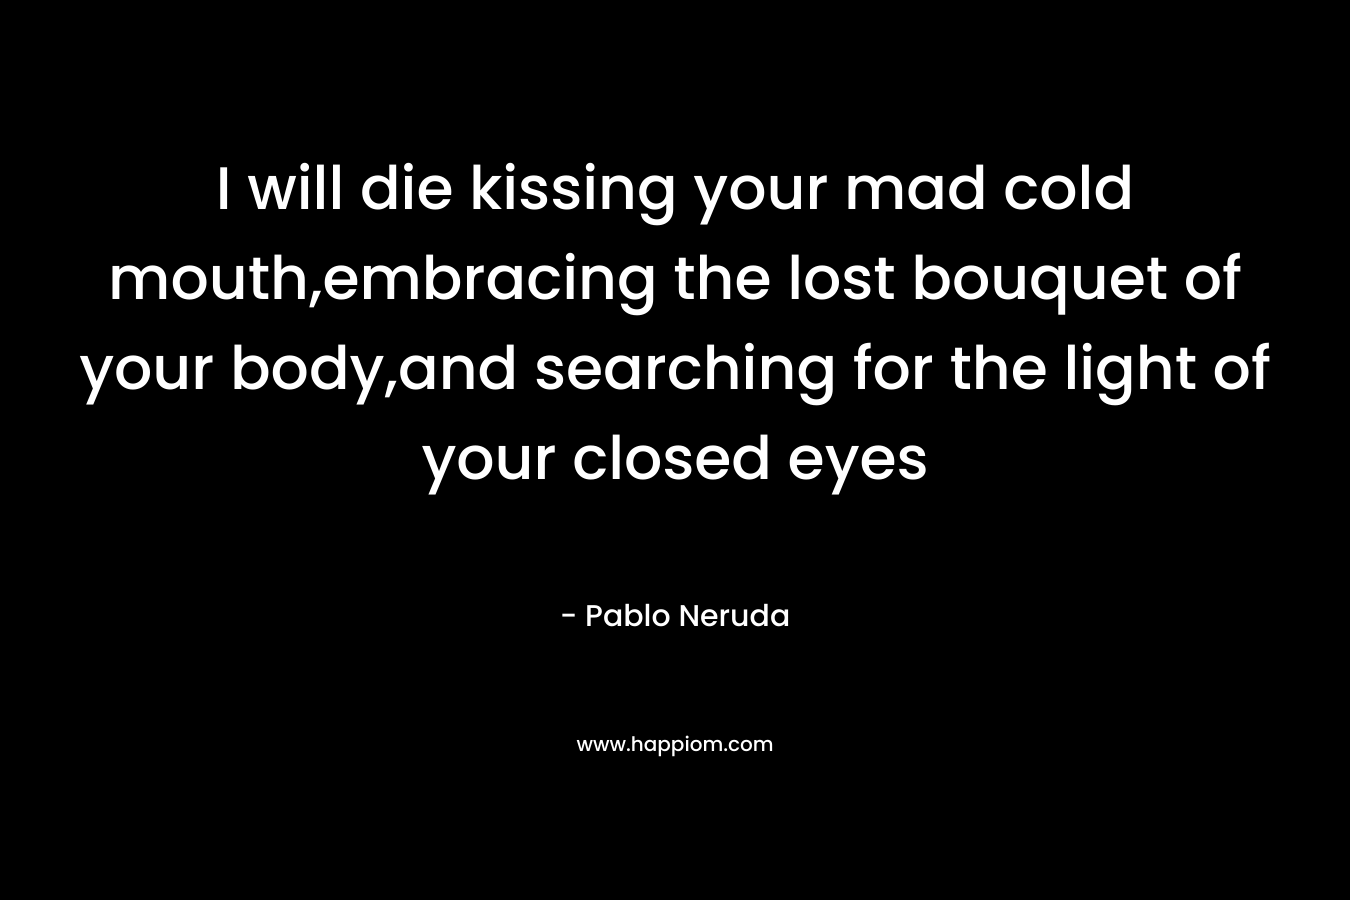 I will die kissing your mad cold mouth,embracing the lost bouquet of your body,and searching for the light of your closed eyes – Pablo Neruda